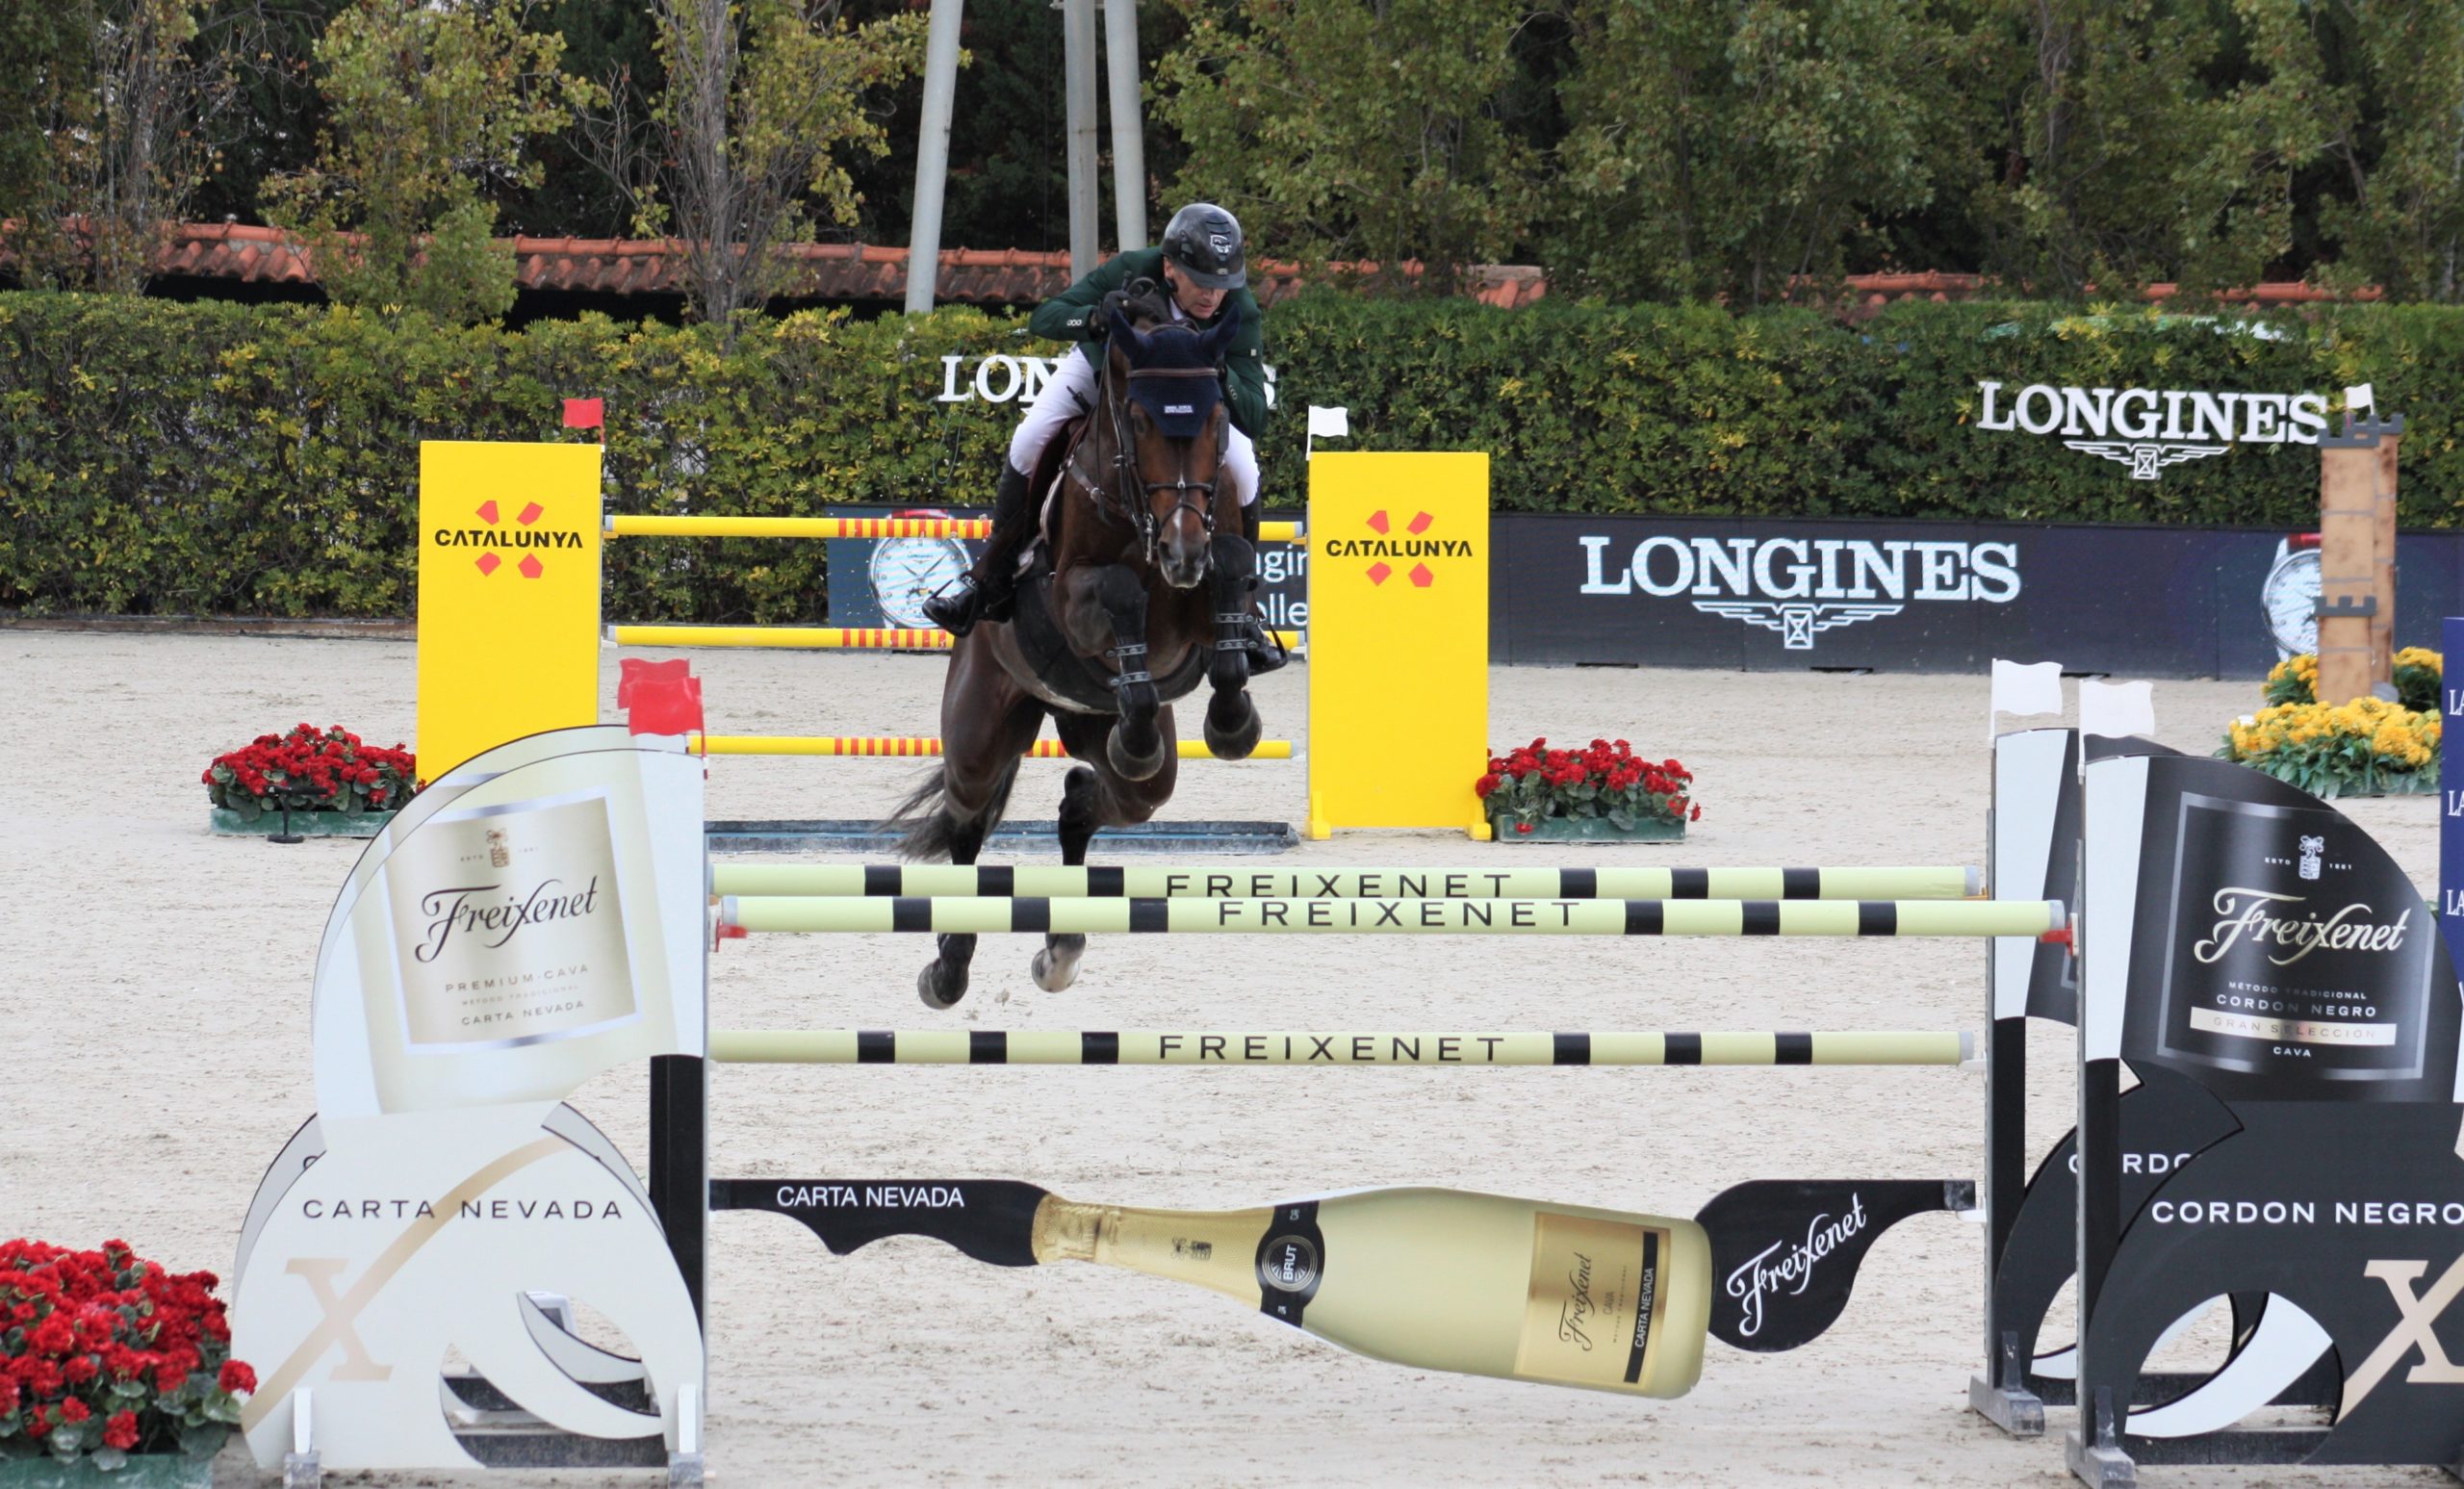 Irish Show Jumping team score excellent runner-up finish in Longines FEI Nations Cup Final